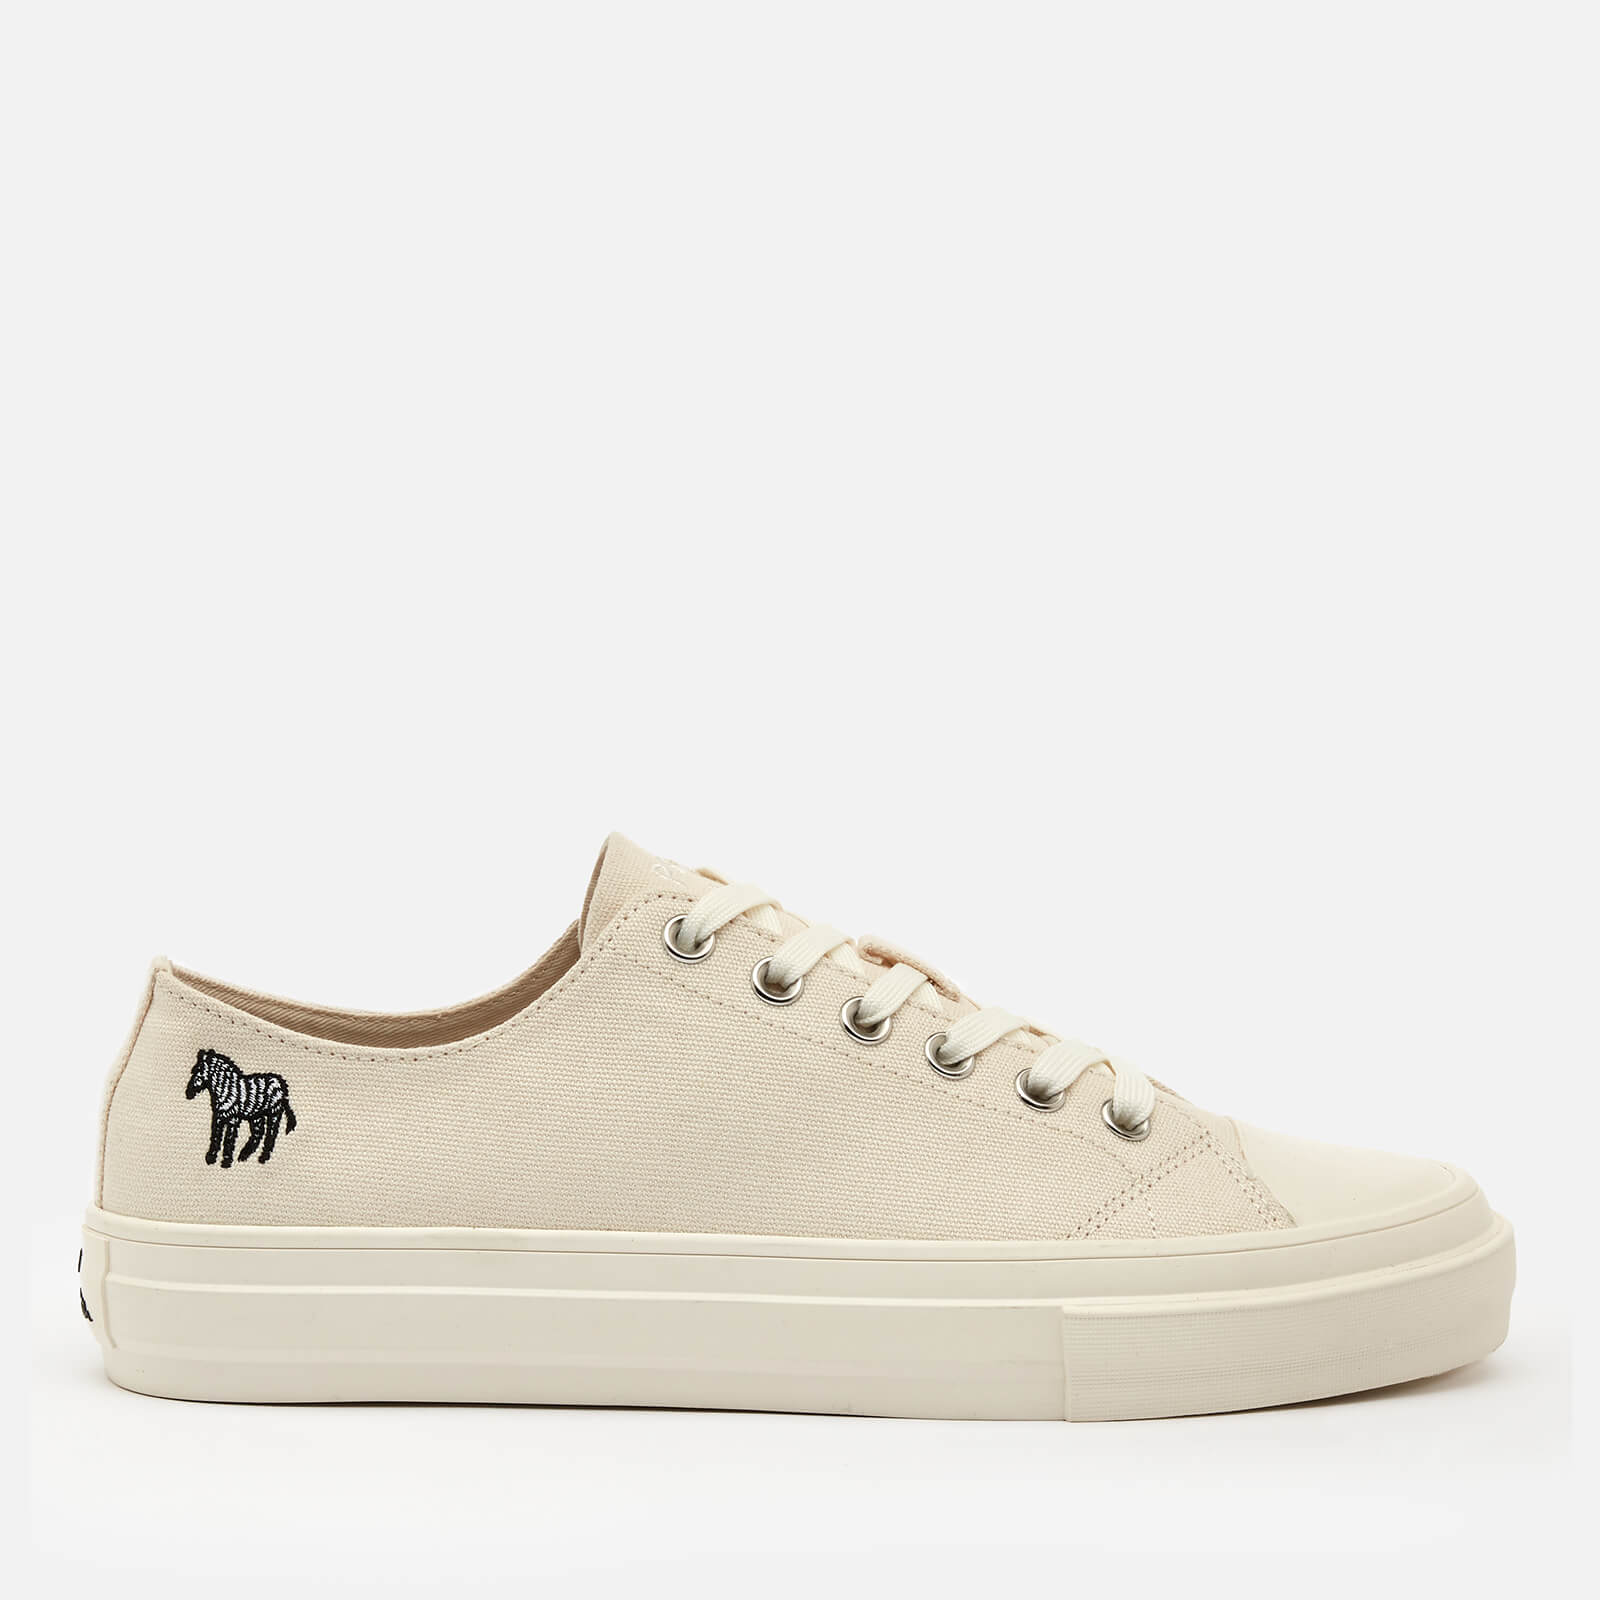 PS Paul Smith Men's Kinsey Low Top Trainers - White - UK 7